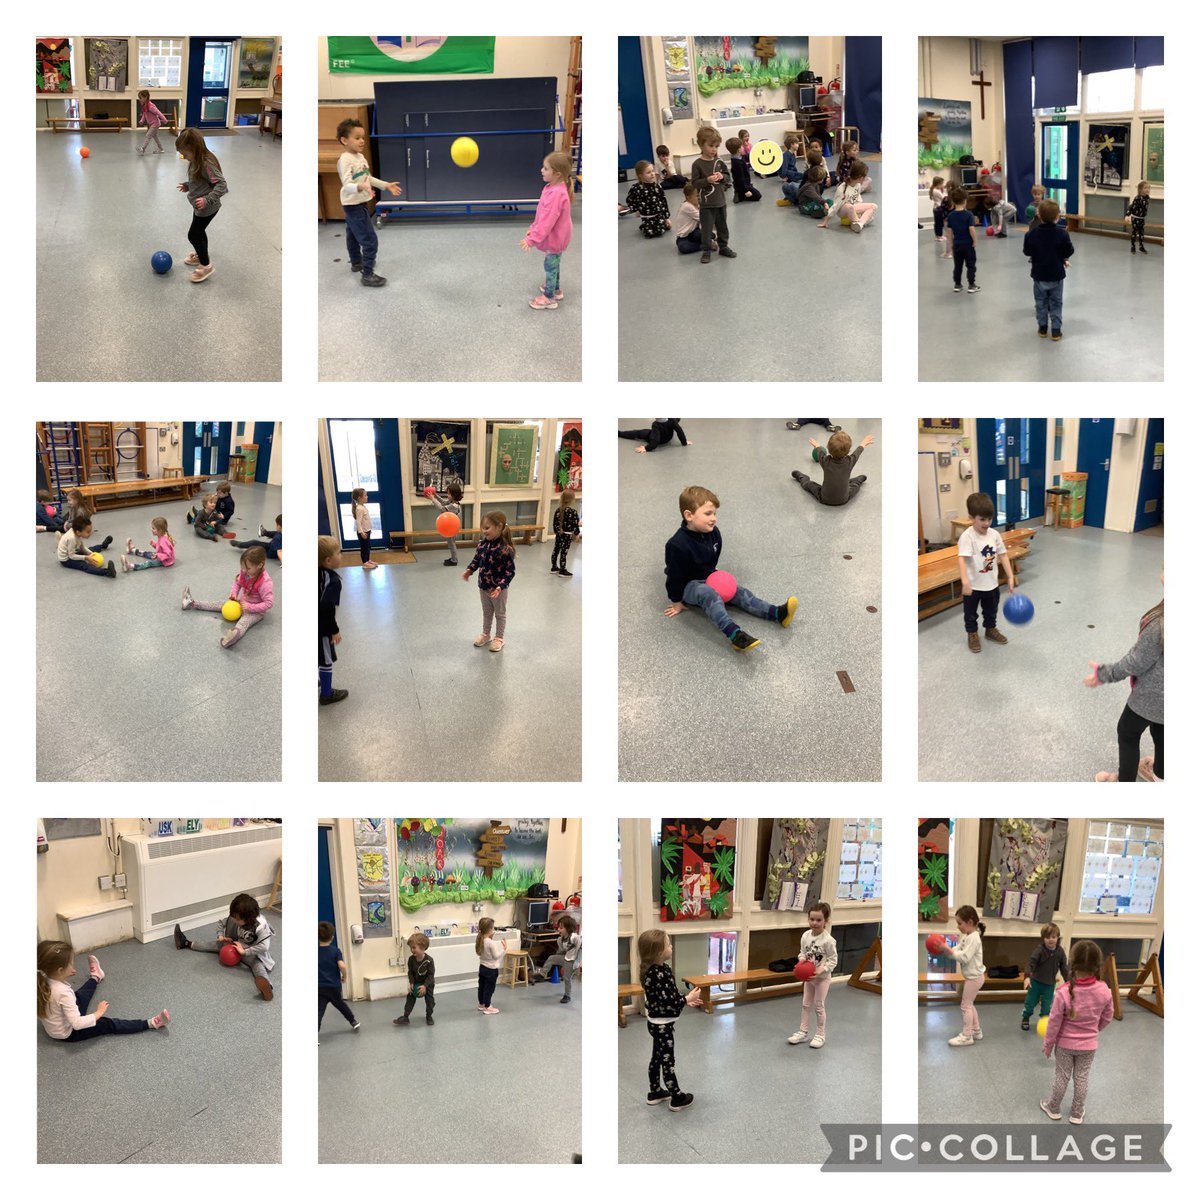 Dosbarth Willow have been working hard on our ball skills today.
#ballskills #teamwork